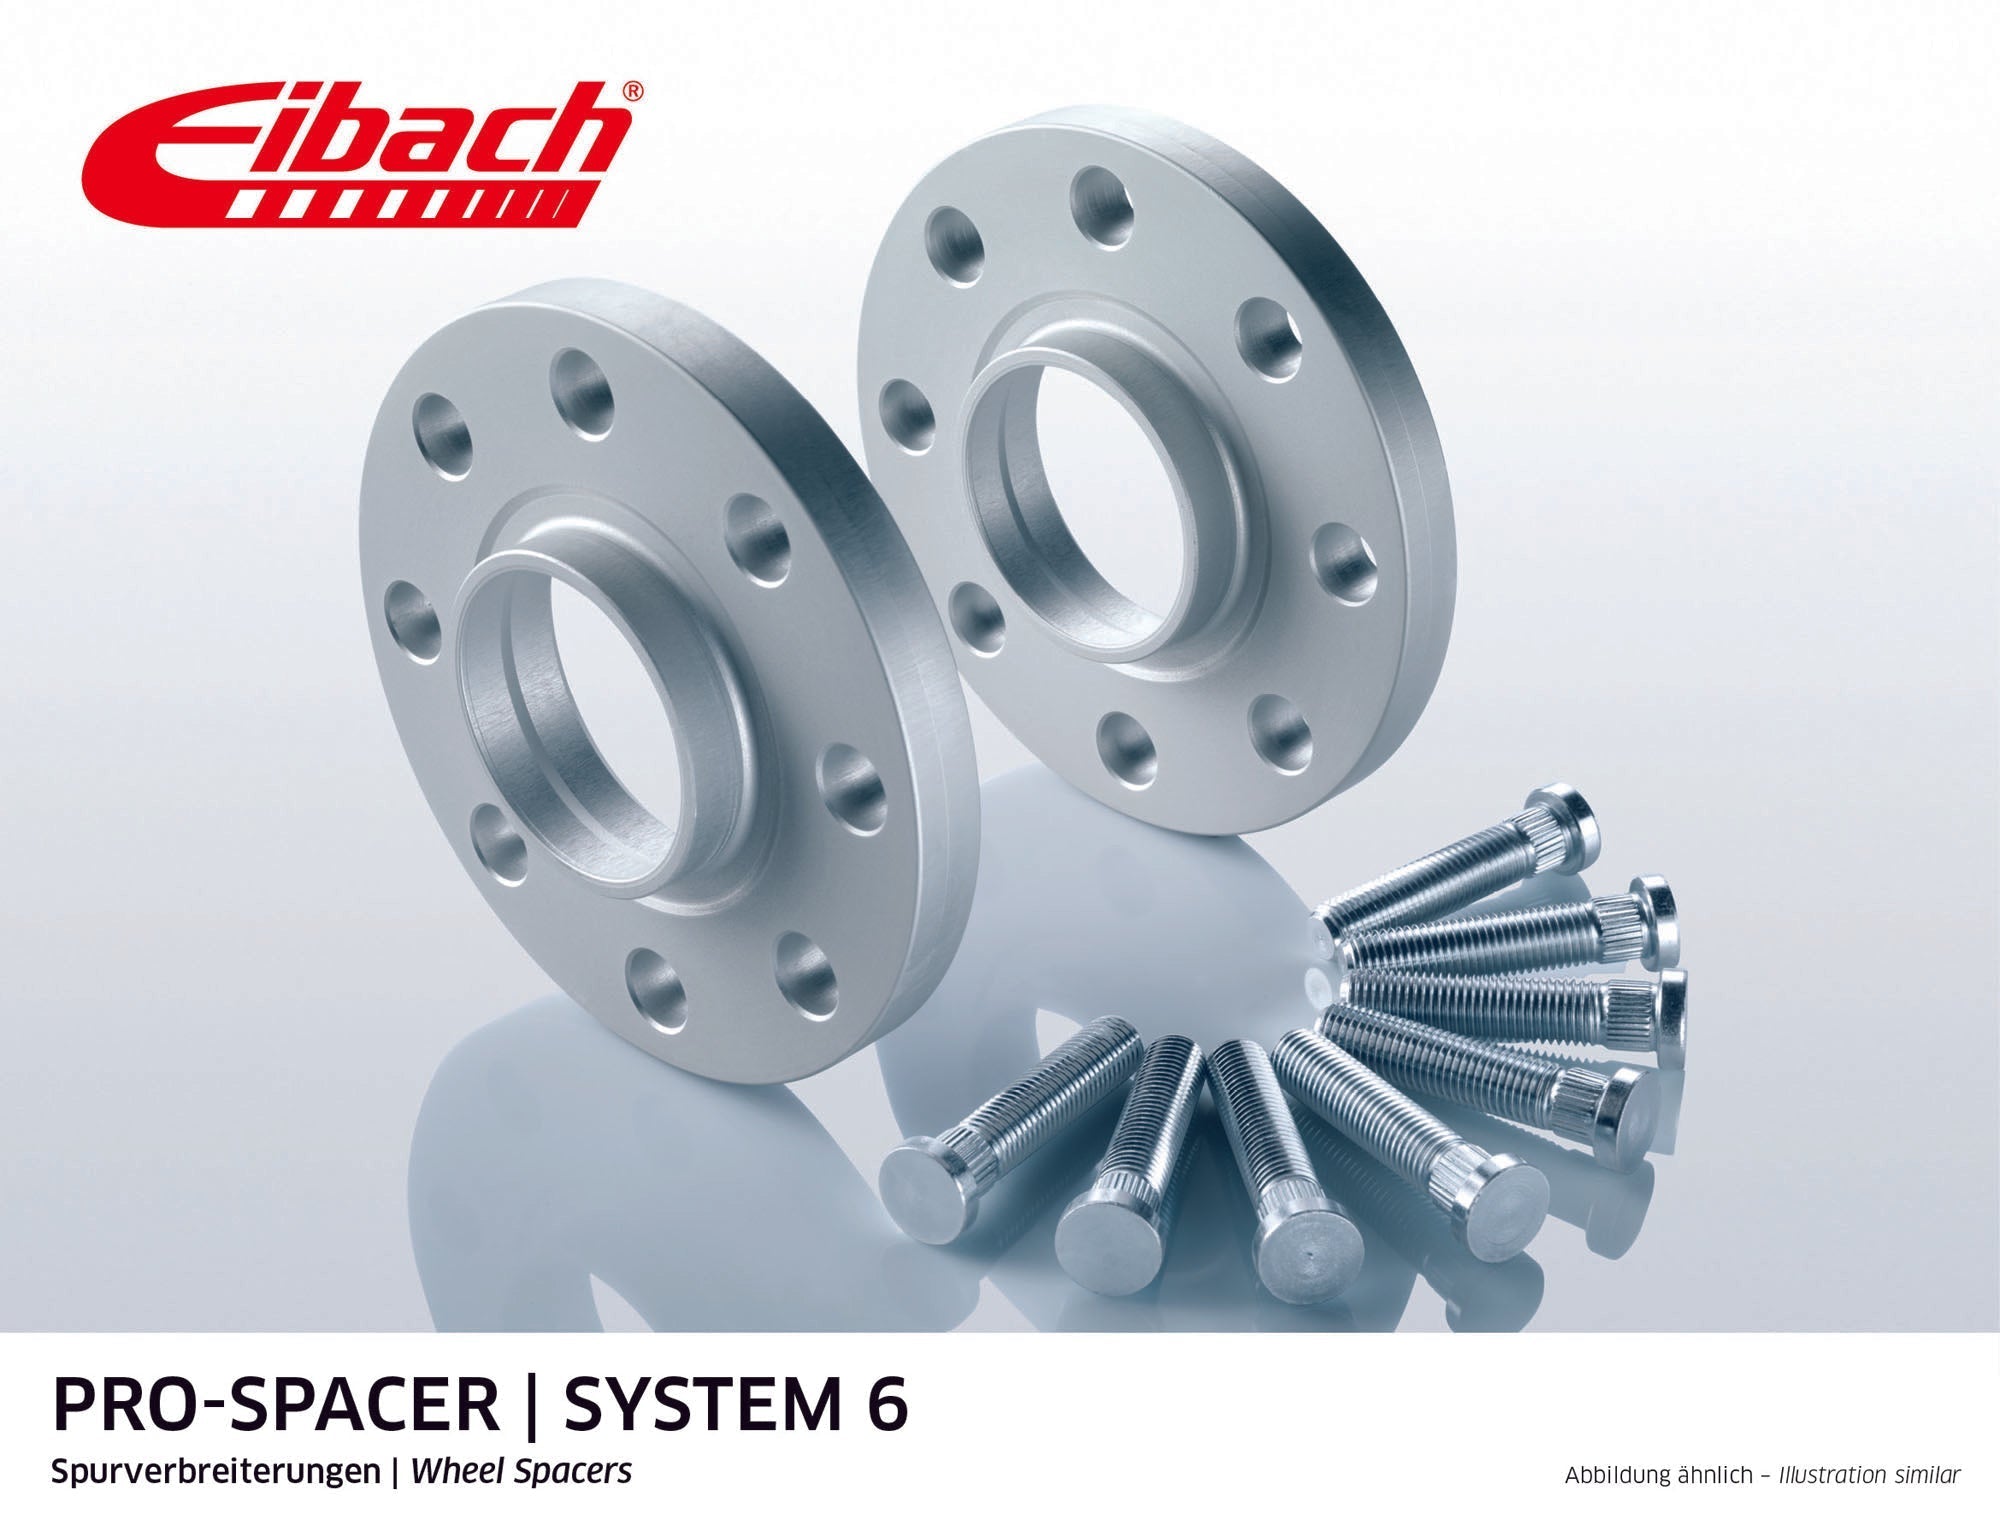 Eibach 7mm Pro-Spacer - Silver Anodized Wheel Spacer 911 1993-97 #S90-6-07-001